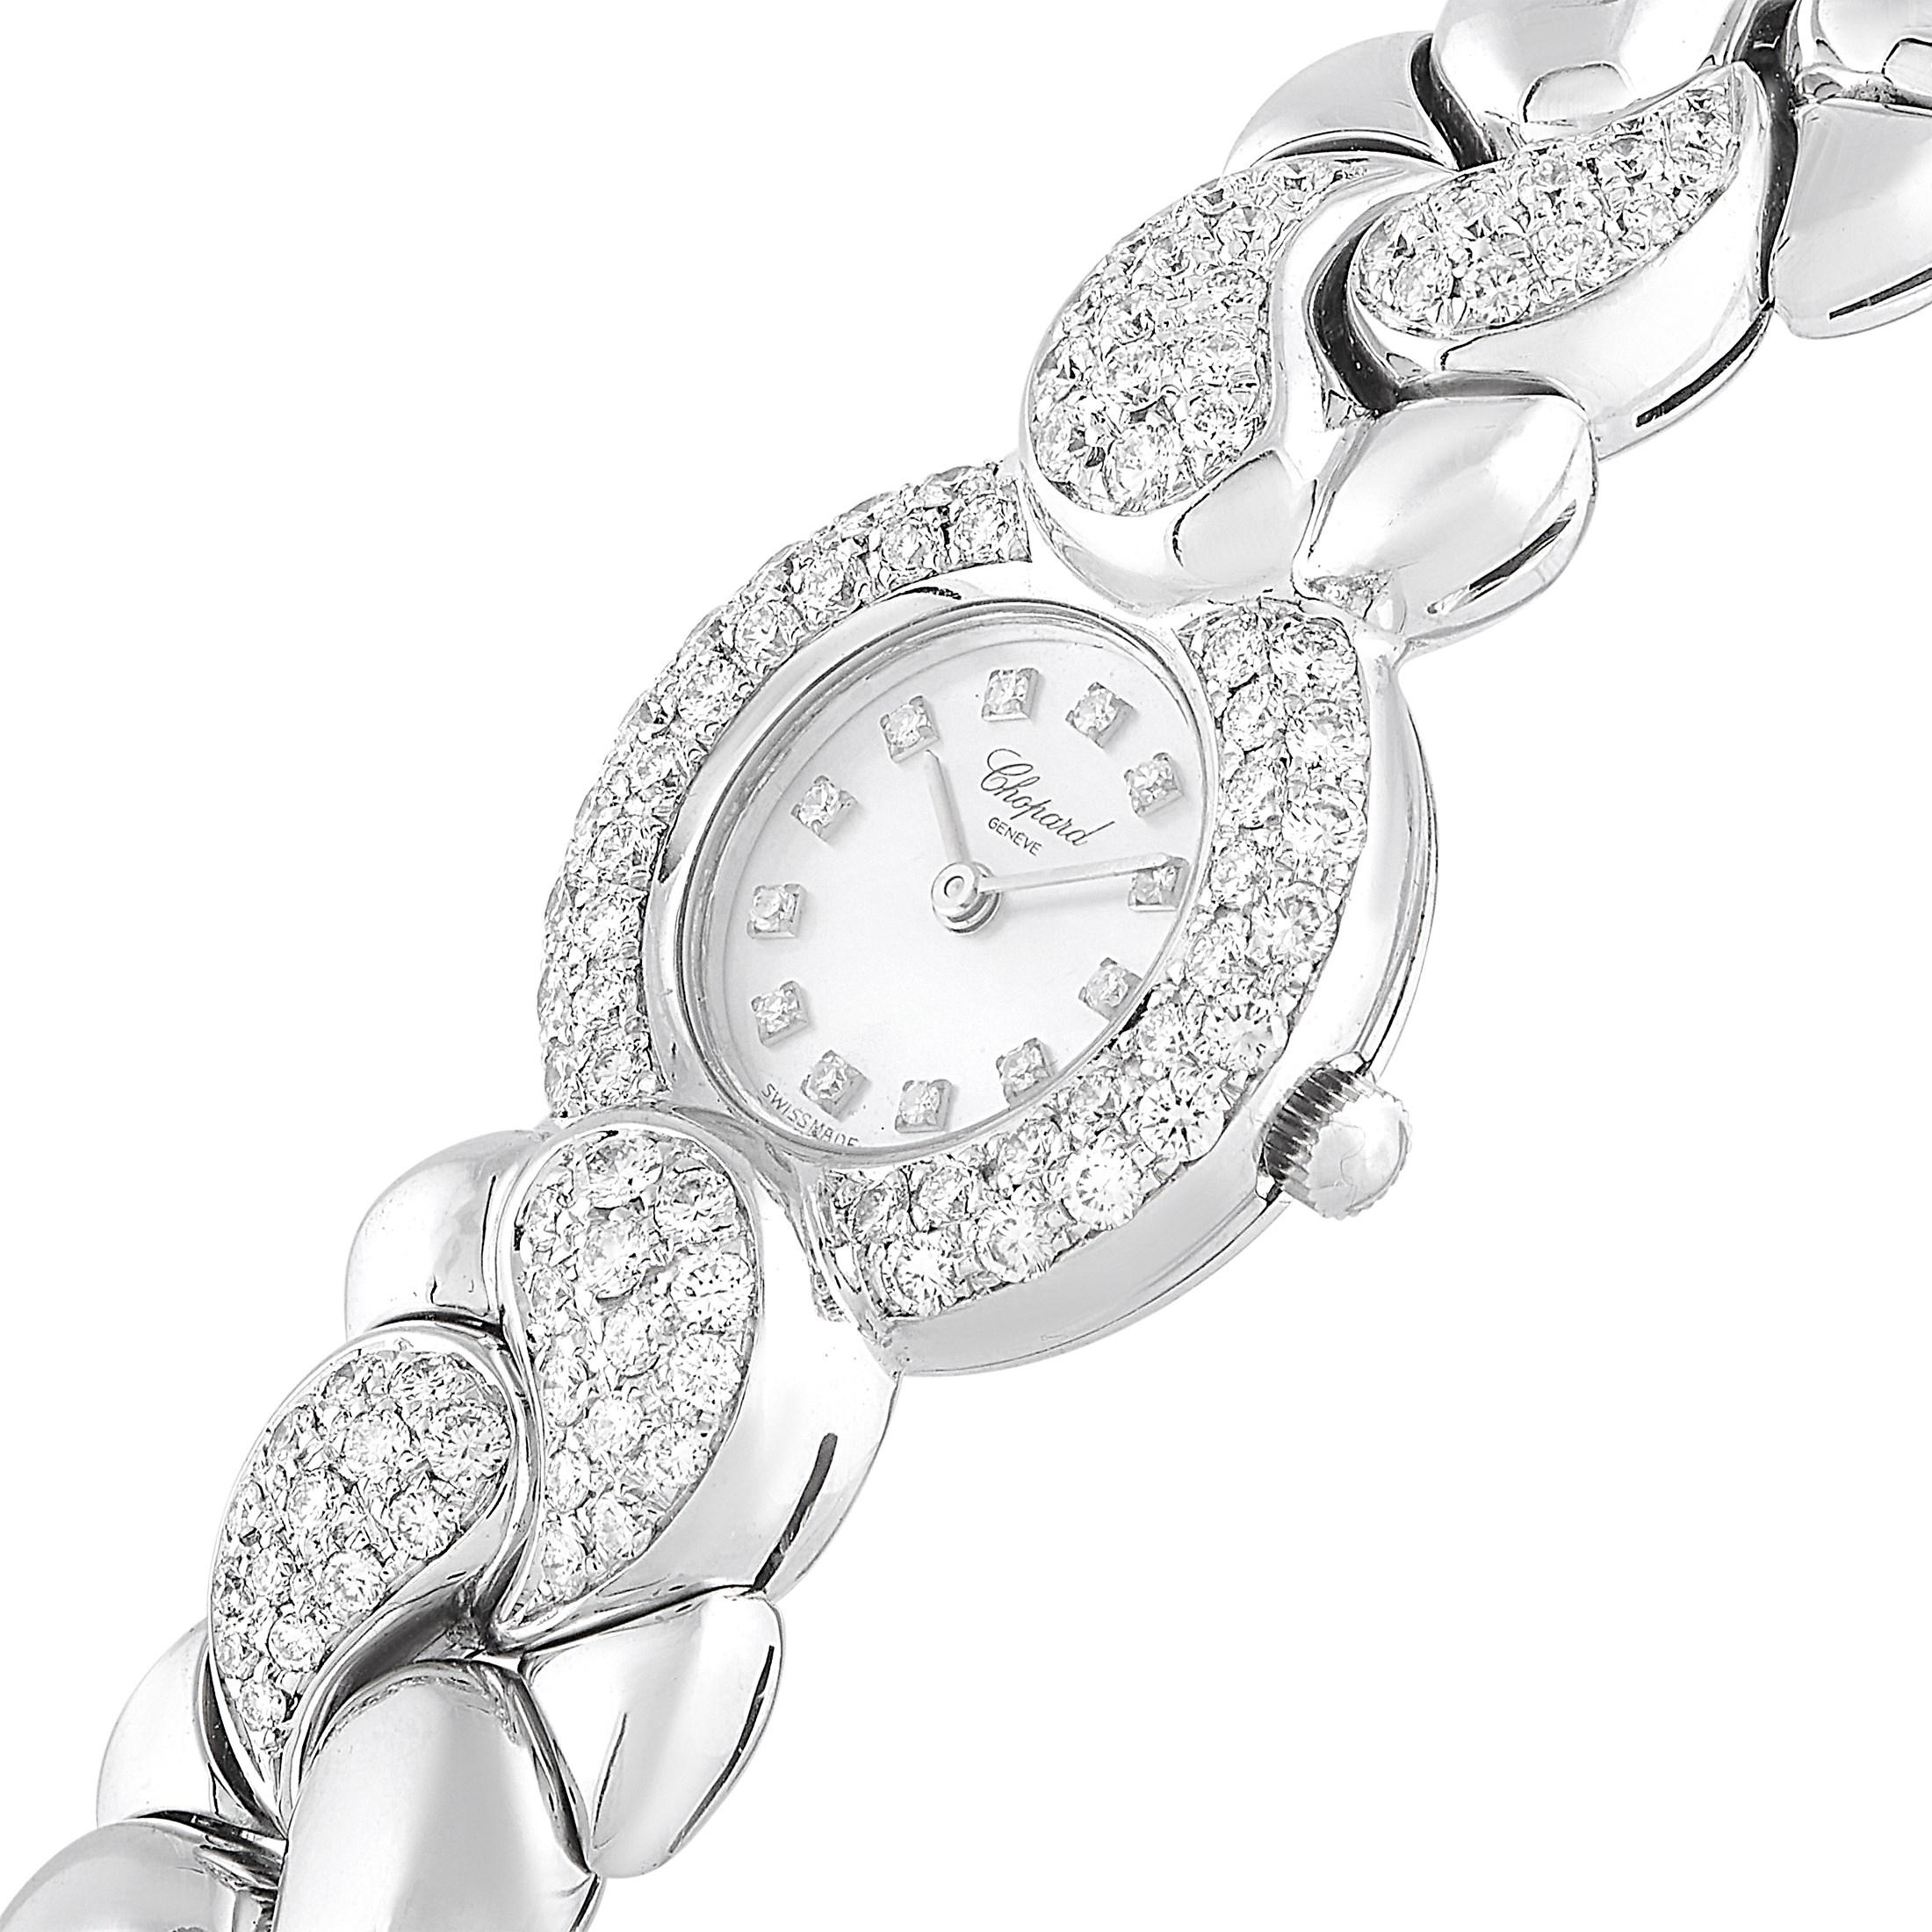 The Chopard Casmir watch, reference number 443392 917-1, comes with a water-resistant 18K white gold case that measures 23 mm in diameter. The case is embellished with diamonds and presented on a matching diamond-embellished 18K white gold bracelet.